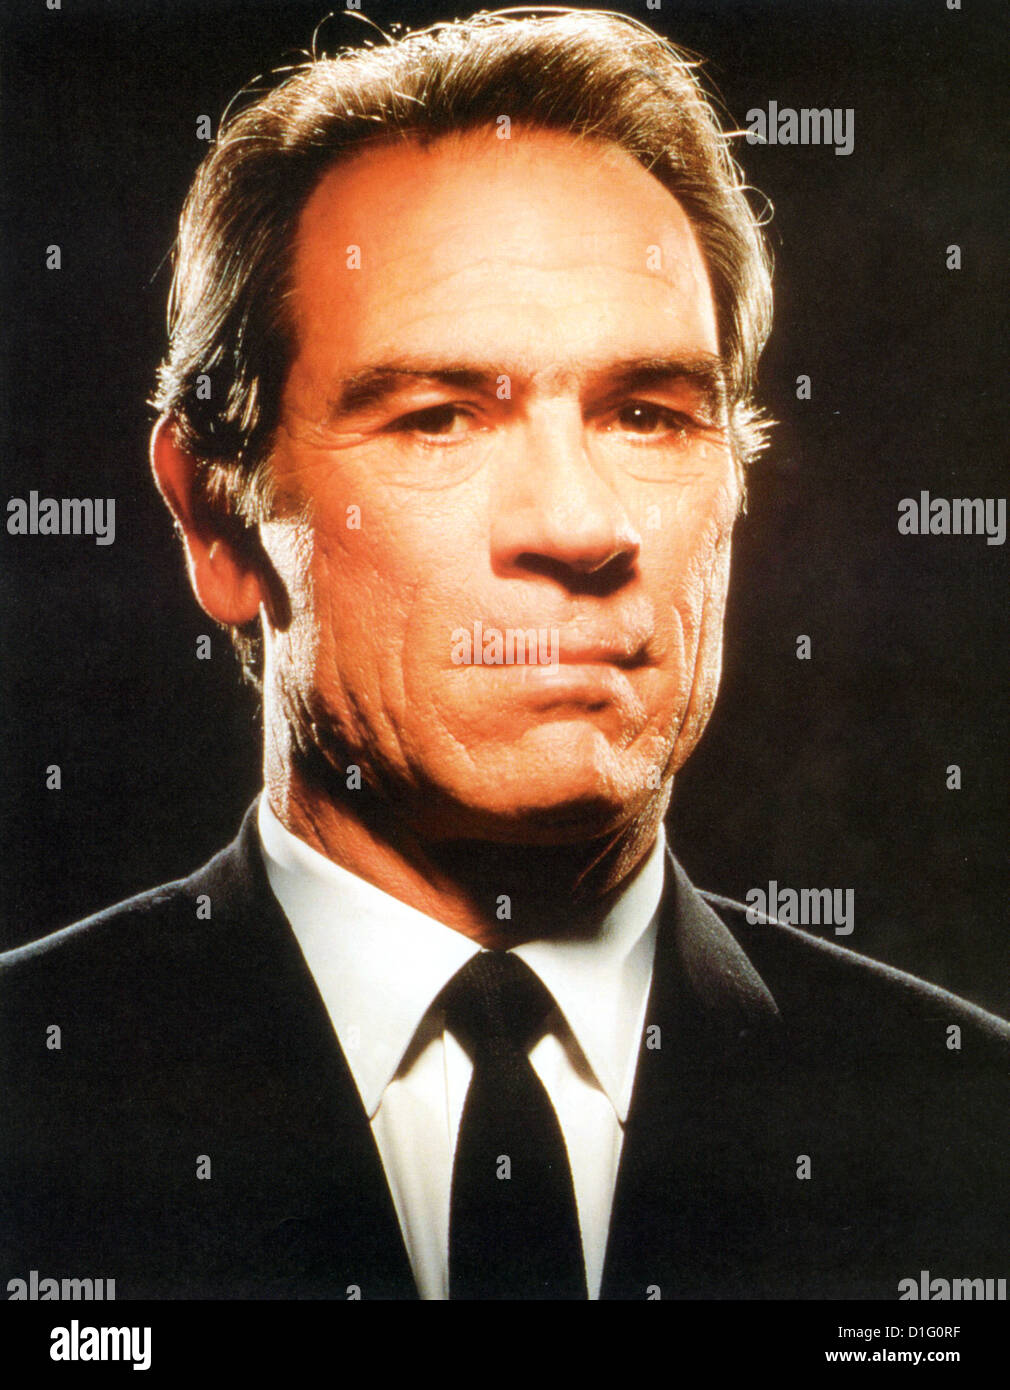 TOMMY LEE JONES  US film actor about 1997 Stock Photo